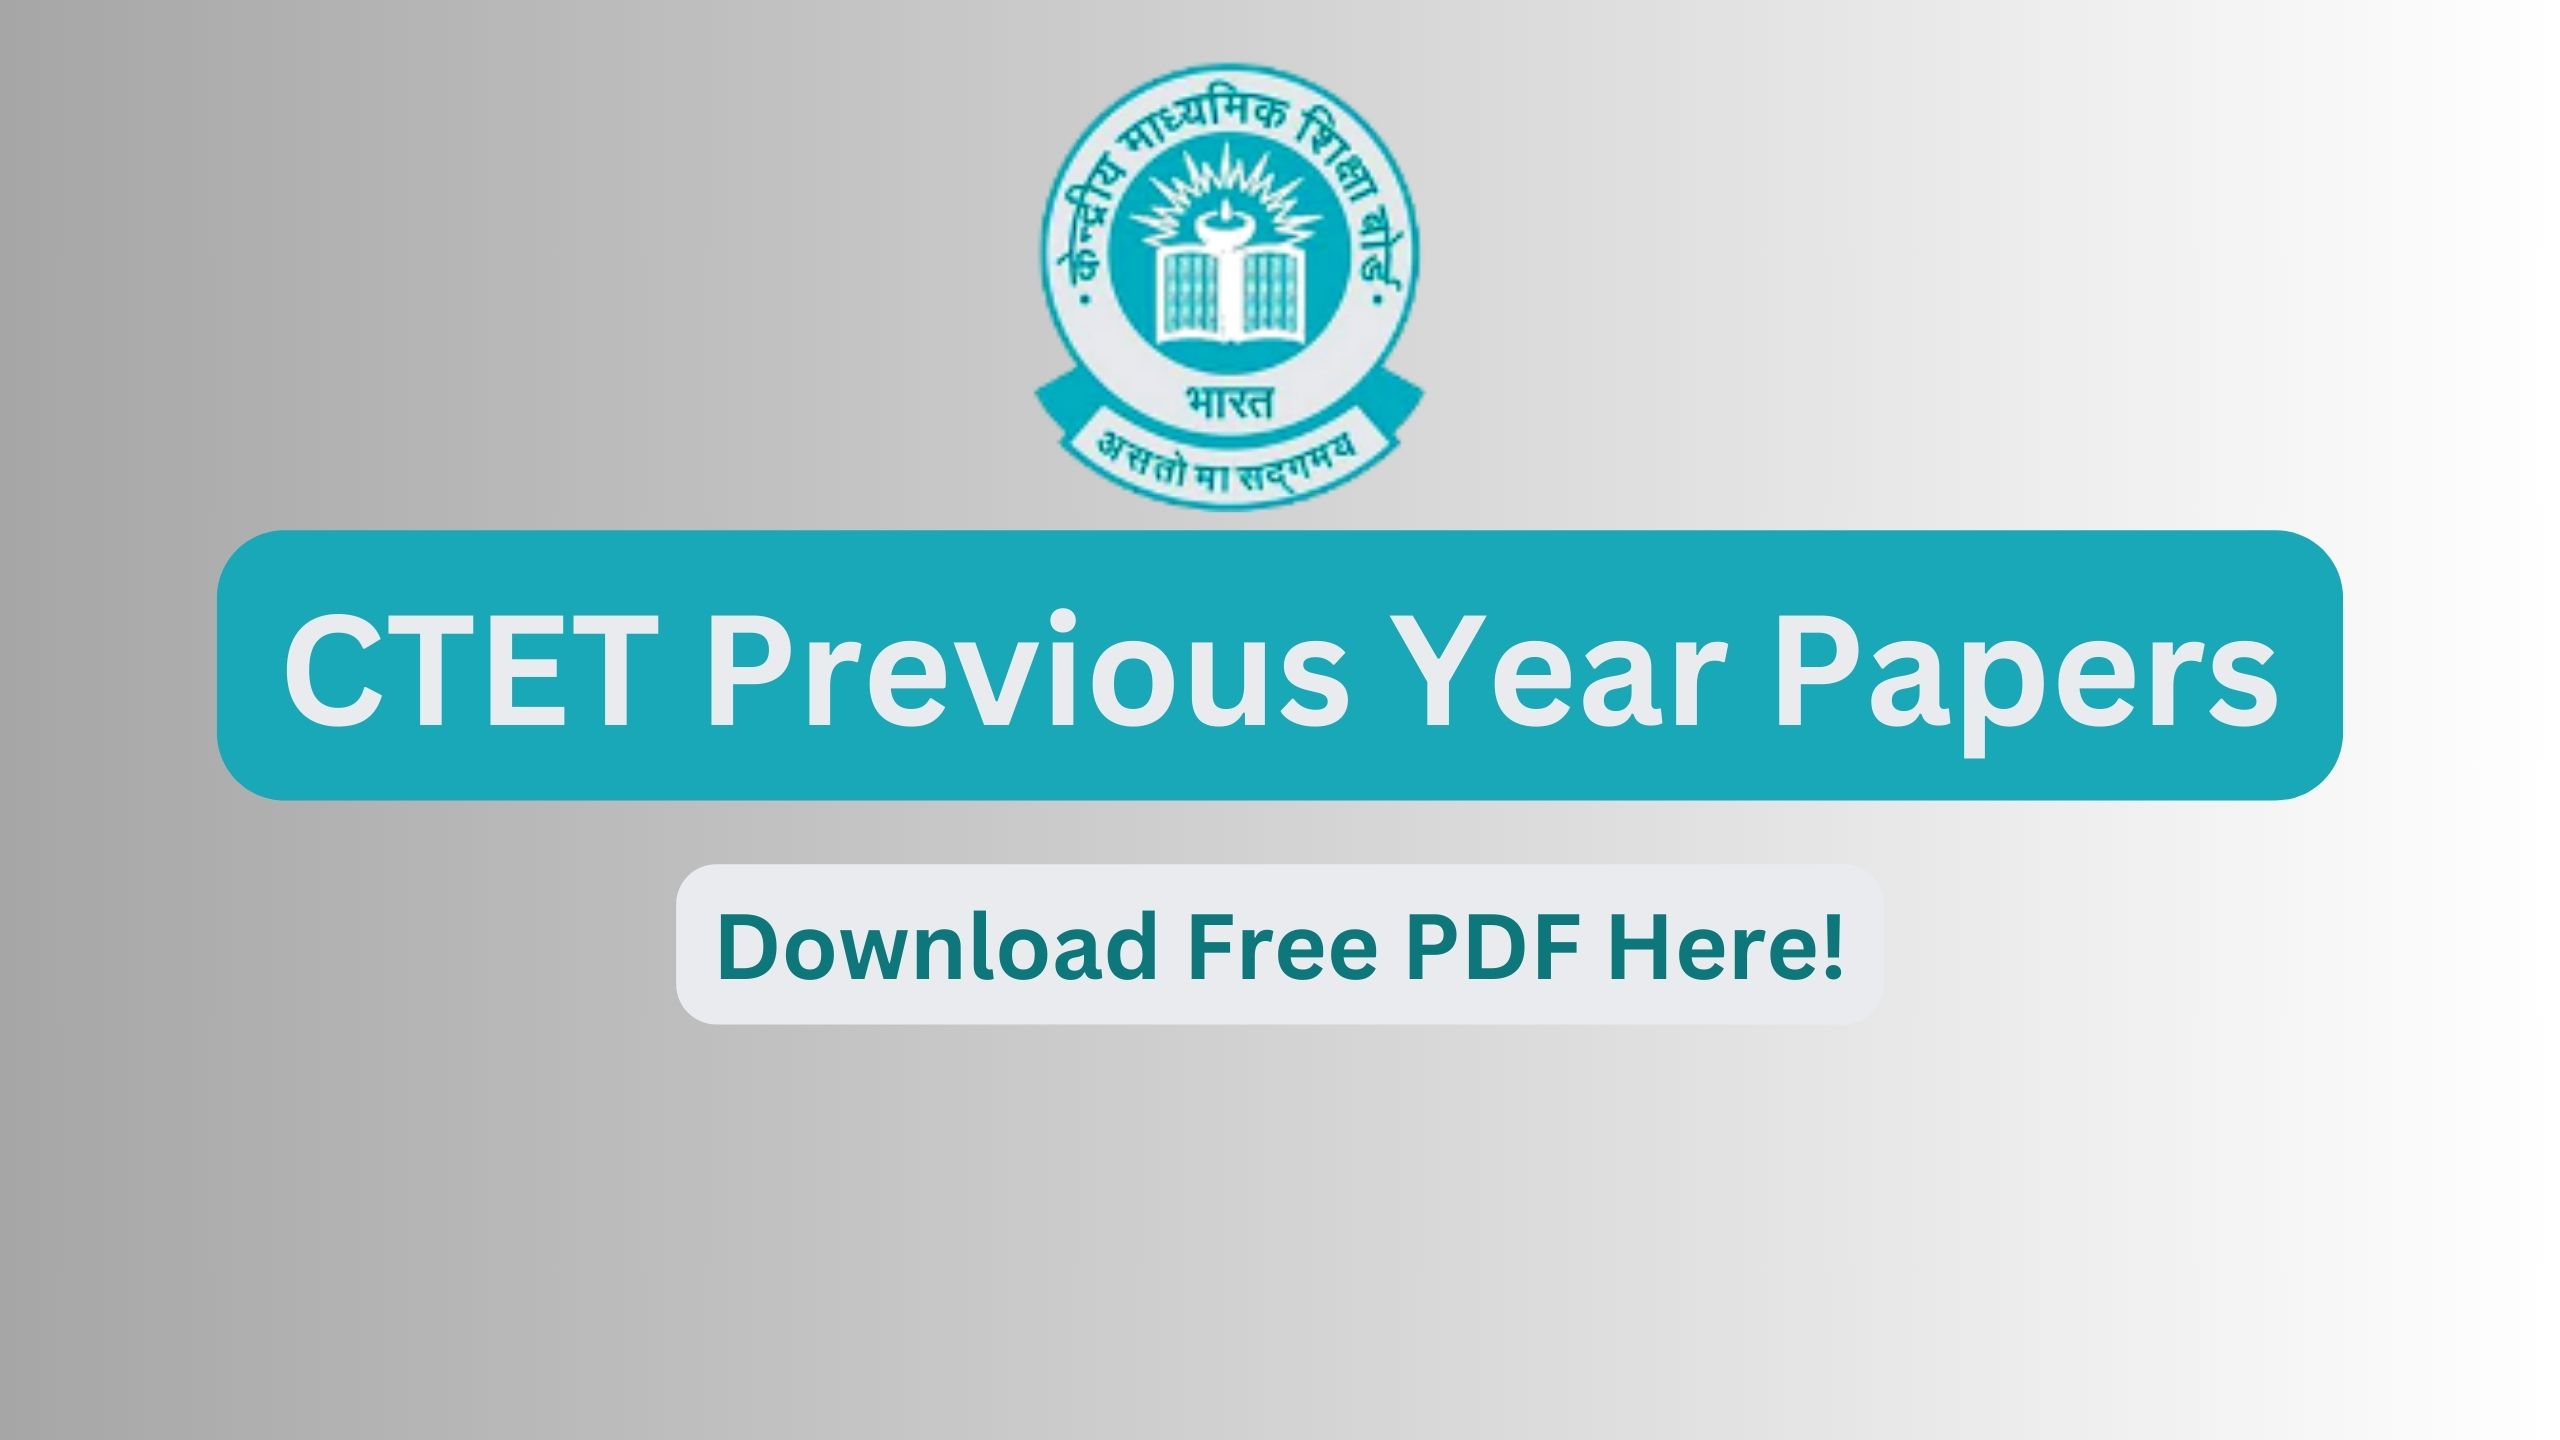 CTET Previous Year Papers, Download Free PDF Here!